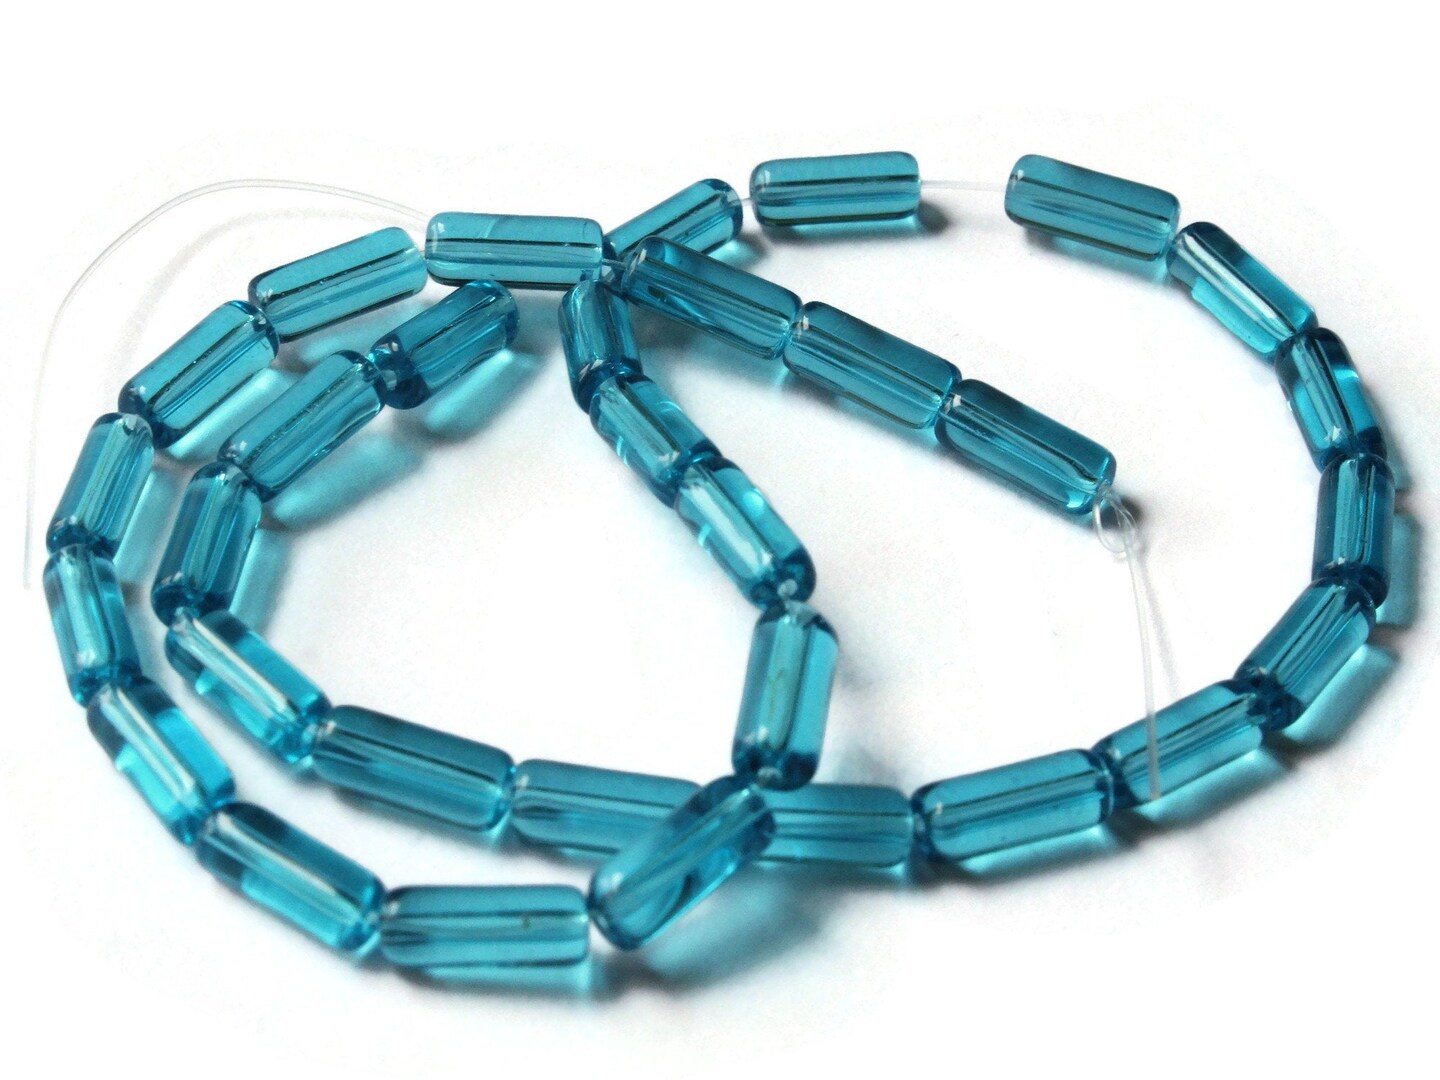 10mm Turquoise Blue Glass Tube Beads Transparent Beads 12.5 Inch Bead Strand Loose Beads